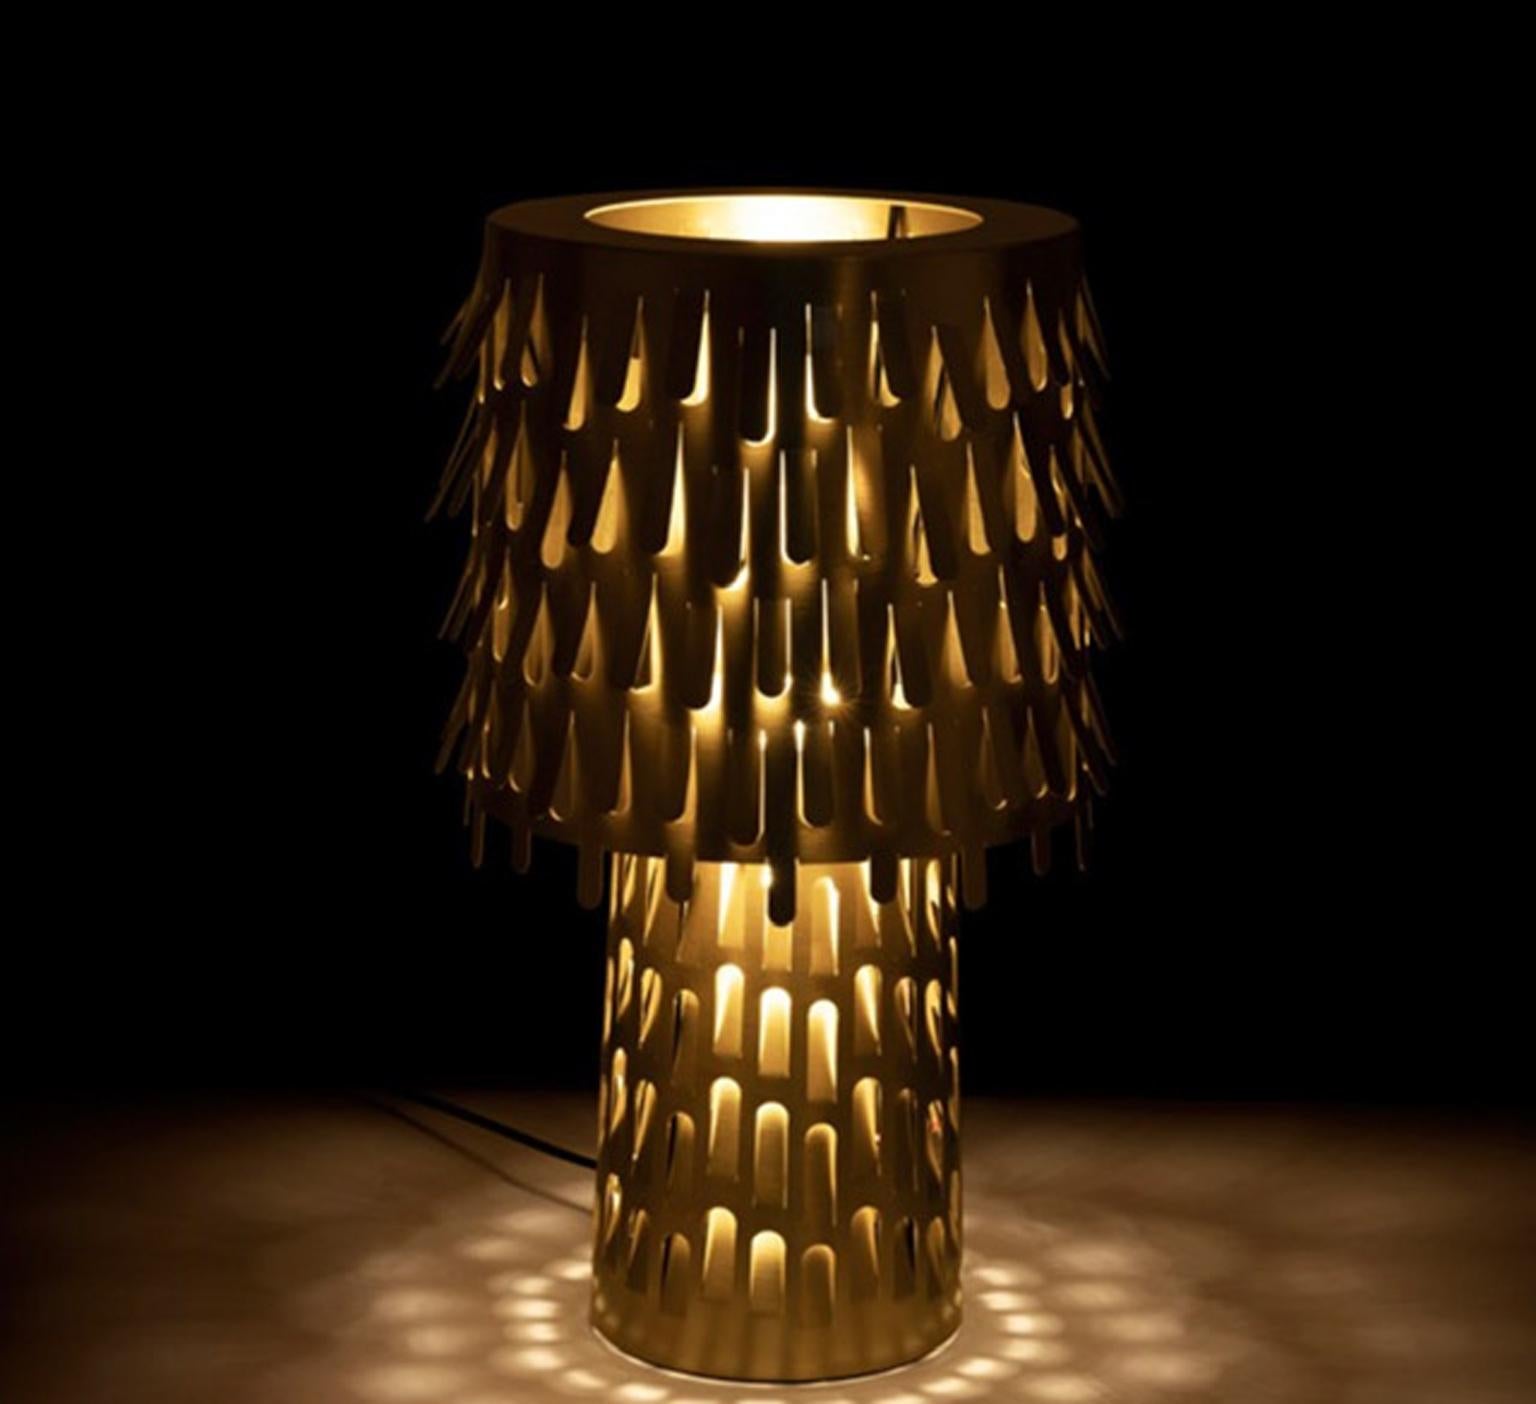 Stunning brass table lamp designed by Campana Brothers and totally  produced in Italy by Ghidini 1961, an historical brass factory.

The perforated structure and the opening of the metal lampshade create a suggestive radiations of light, a very